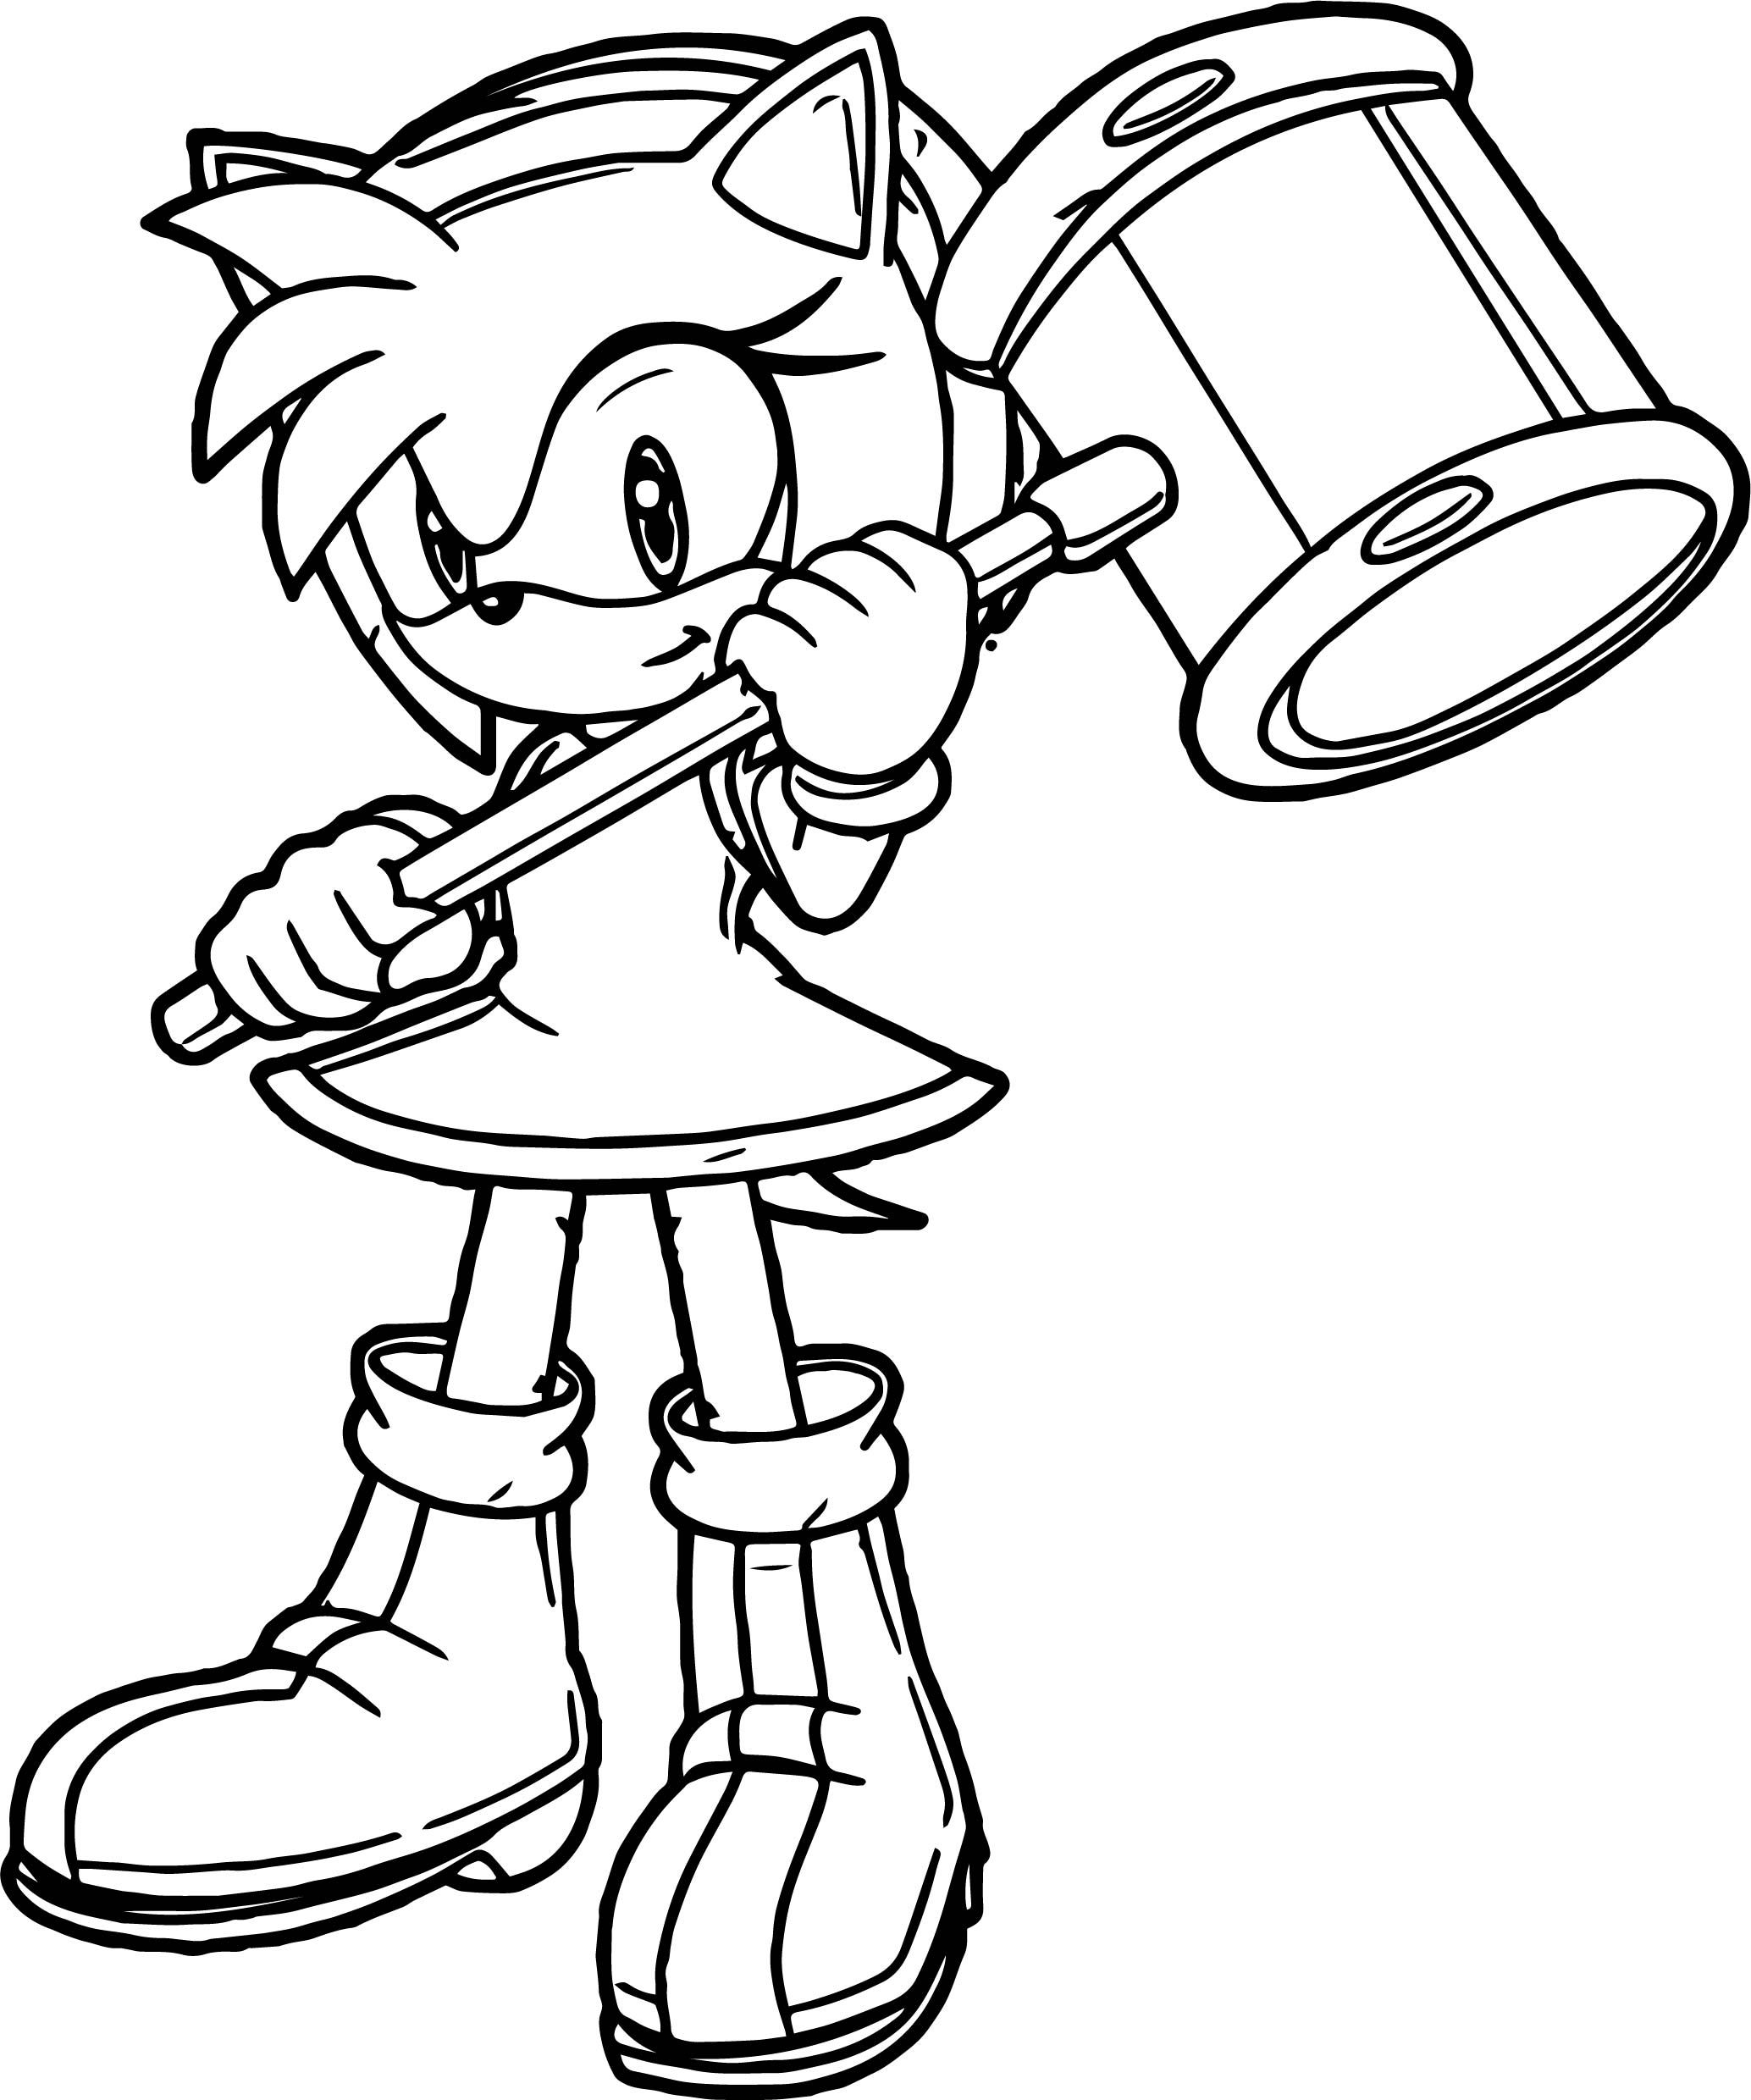 Amy Sonic Coloring Pages - Coloring Home.